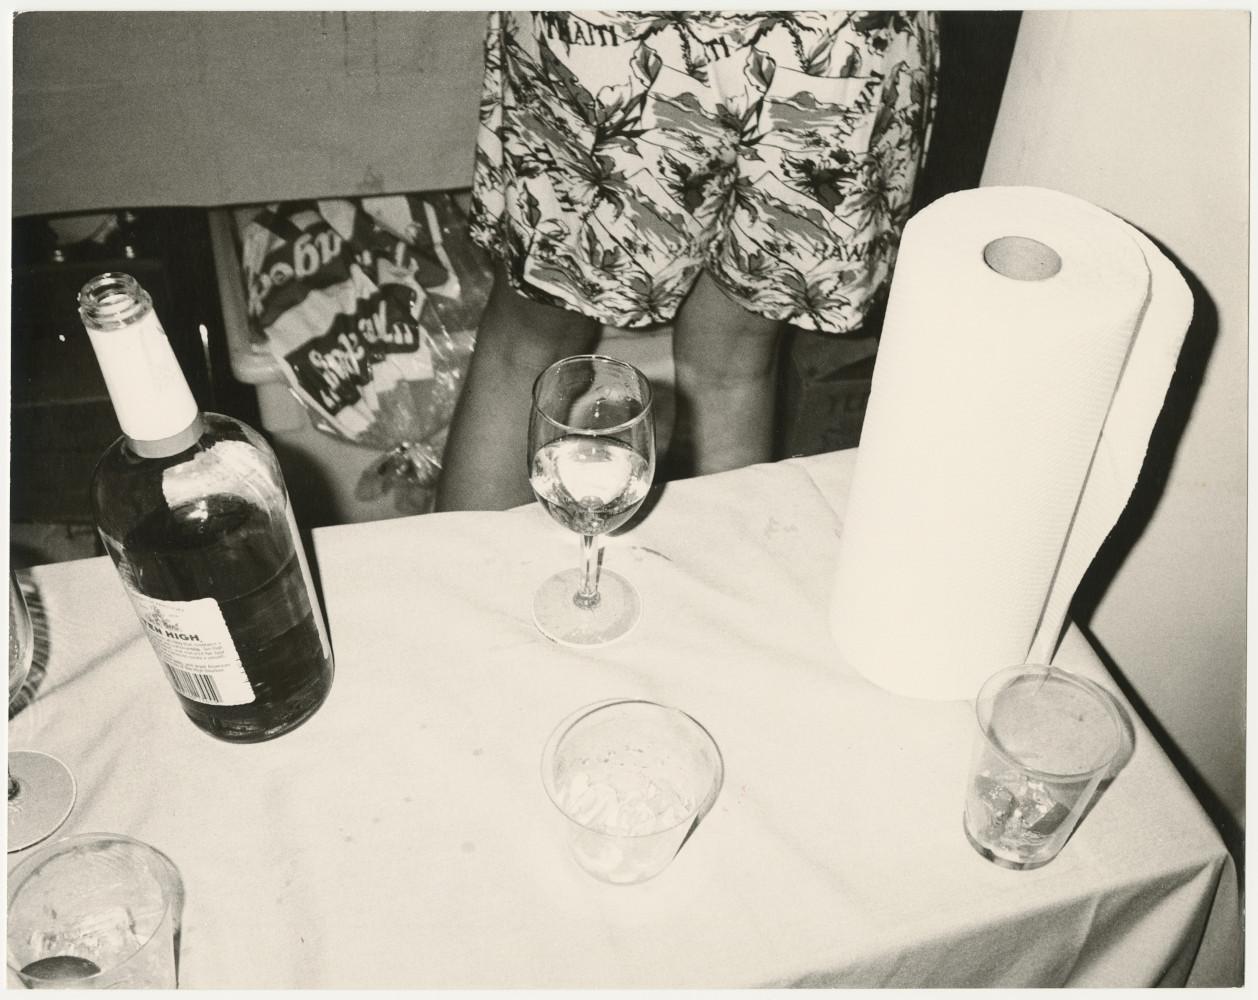 Andy Warhol Still-Life Photograph - Liquor bottle, glasses and paper towel still life